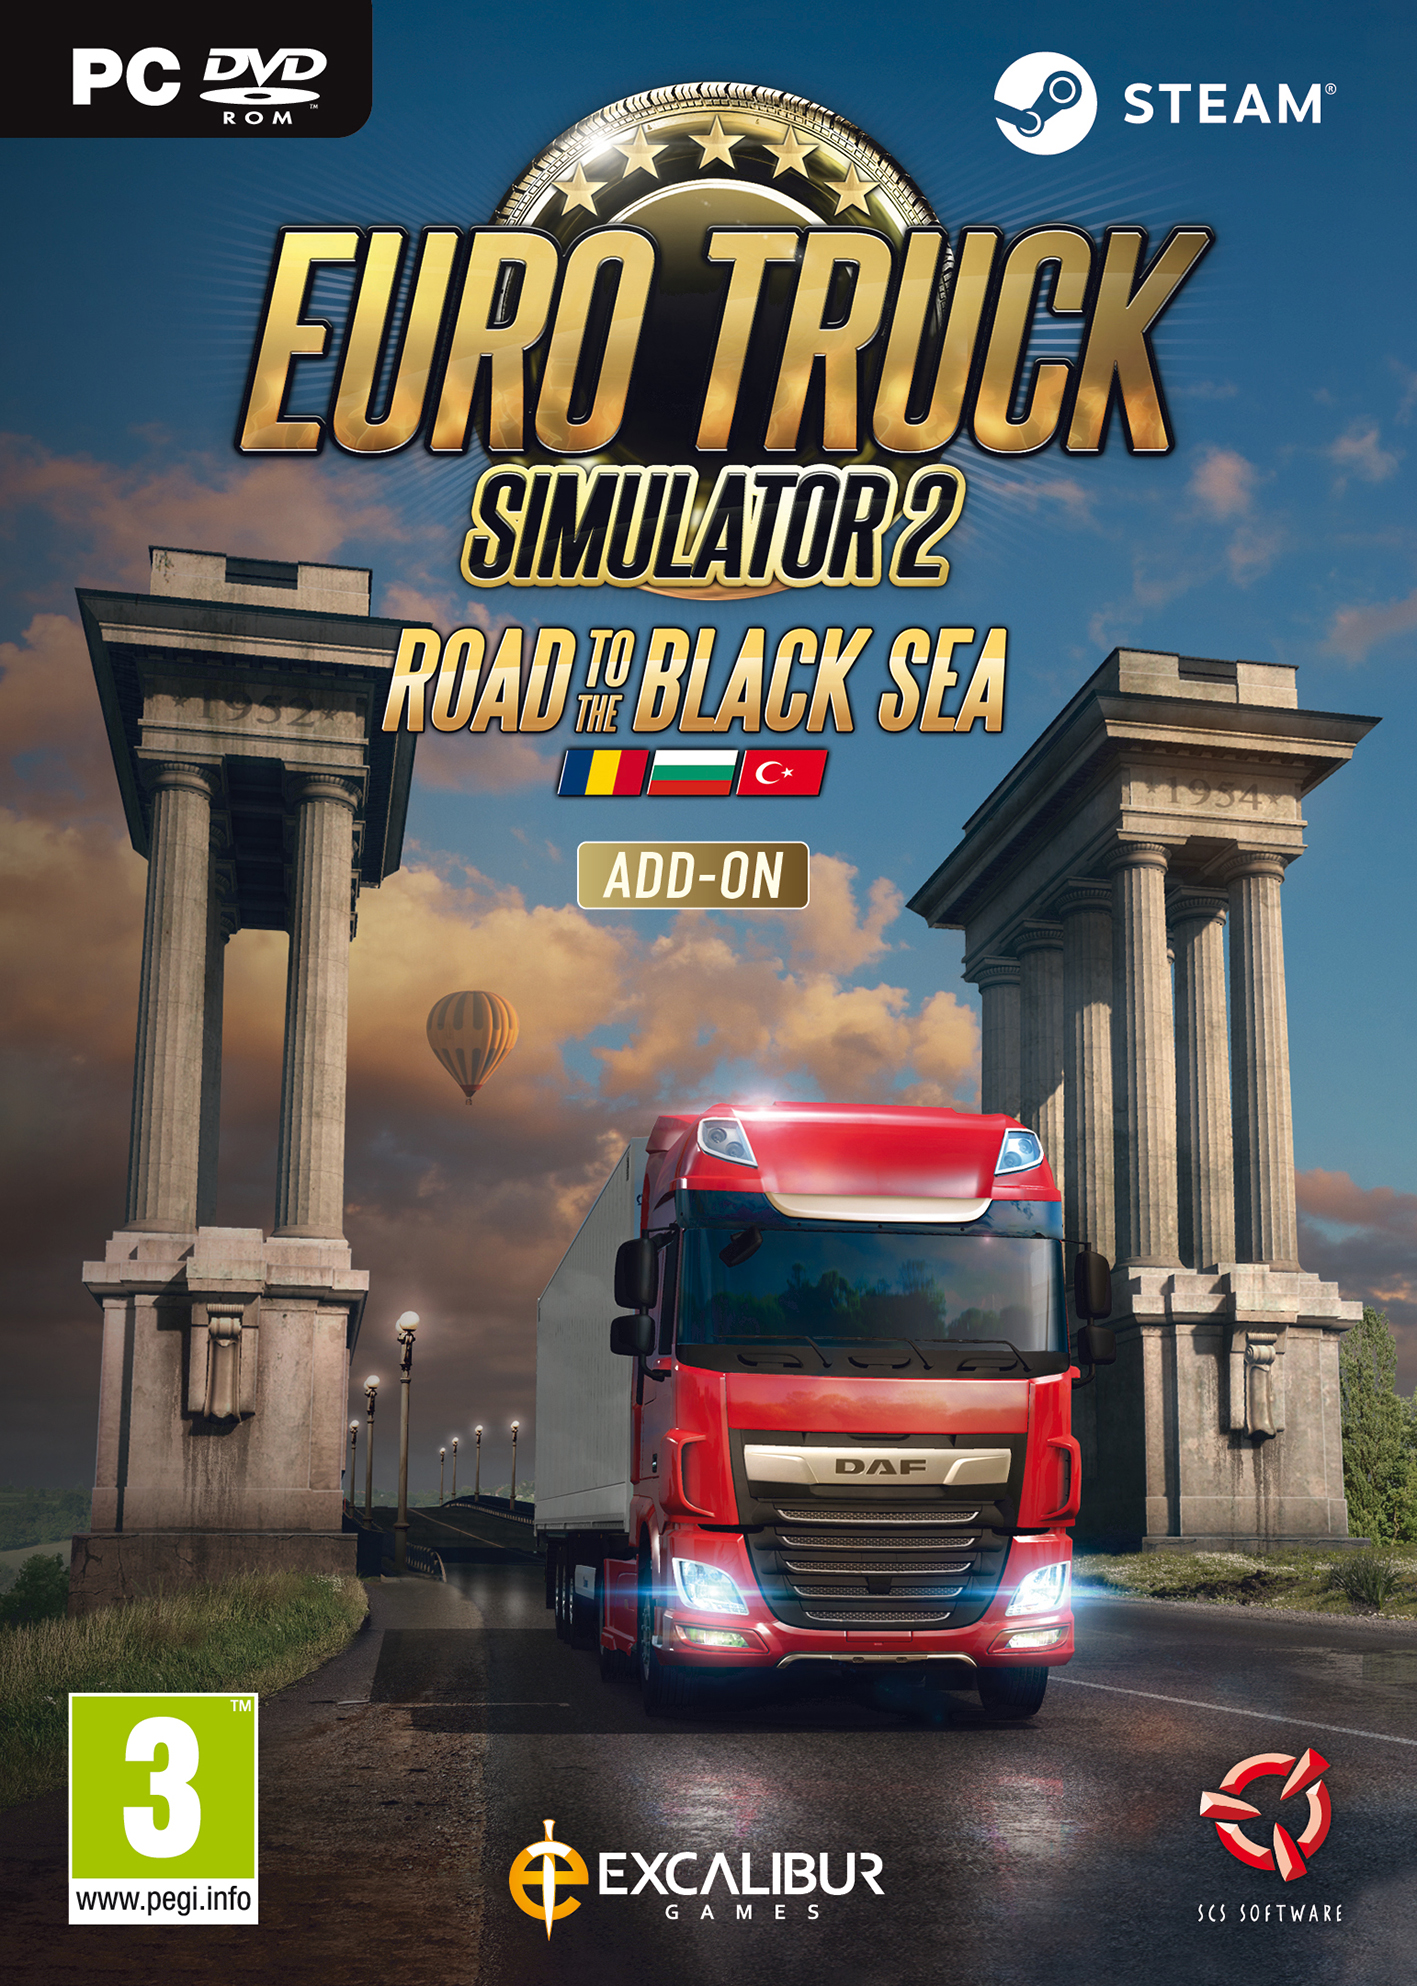 Euro Truck Simulator 2 Highly Compressed PC Game For Free Download